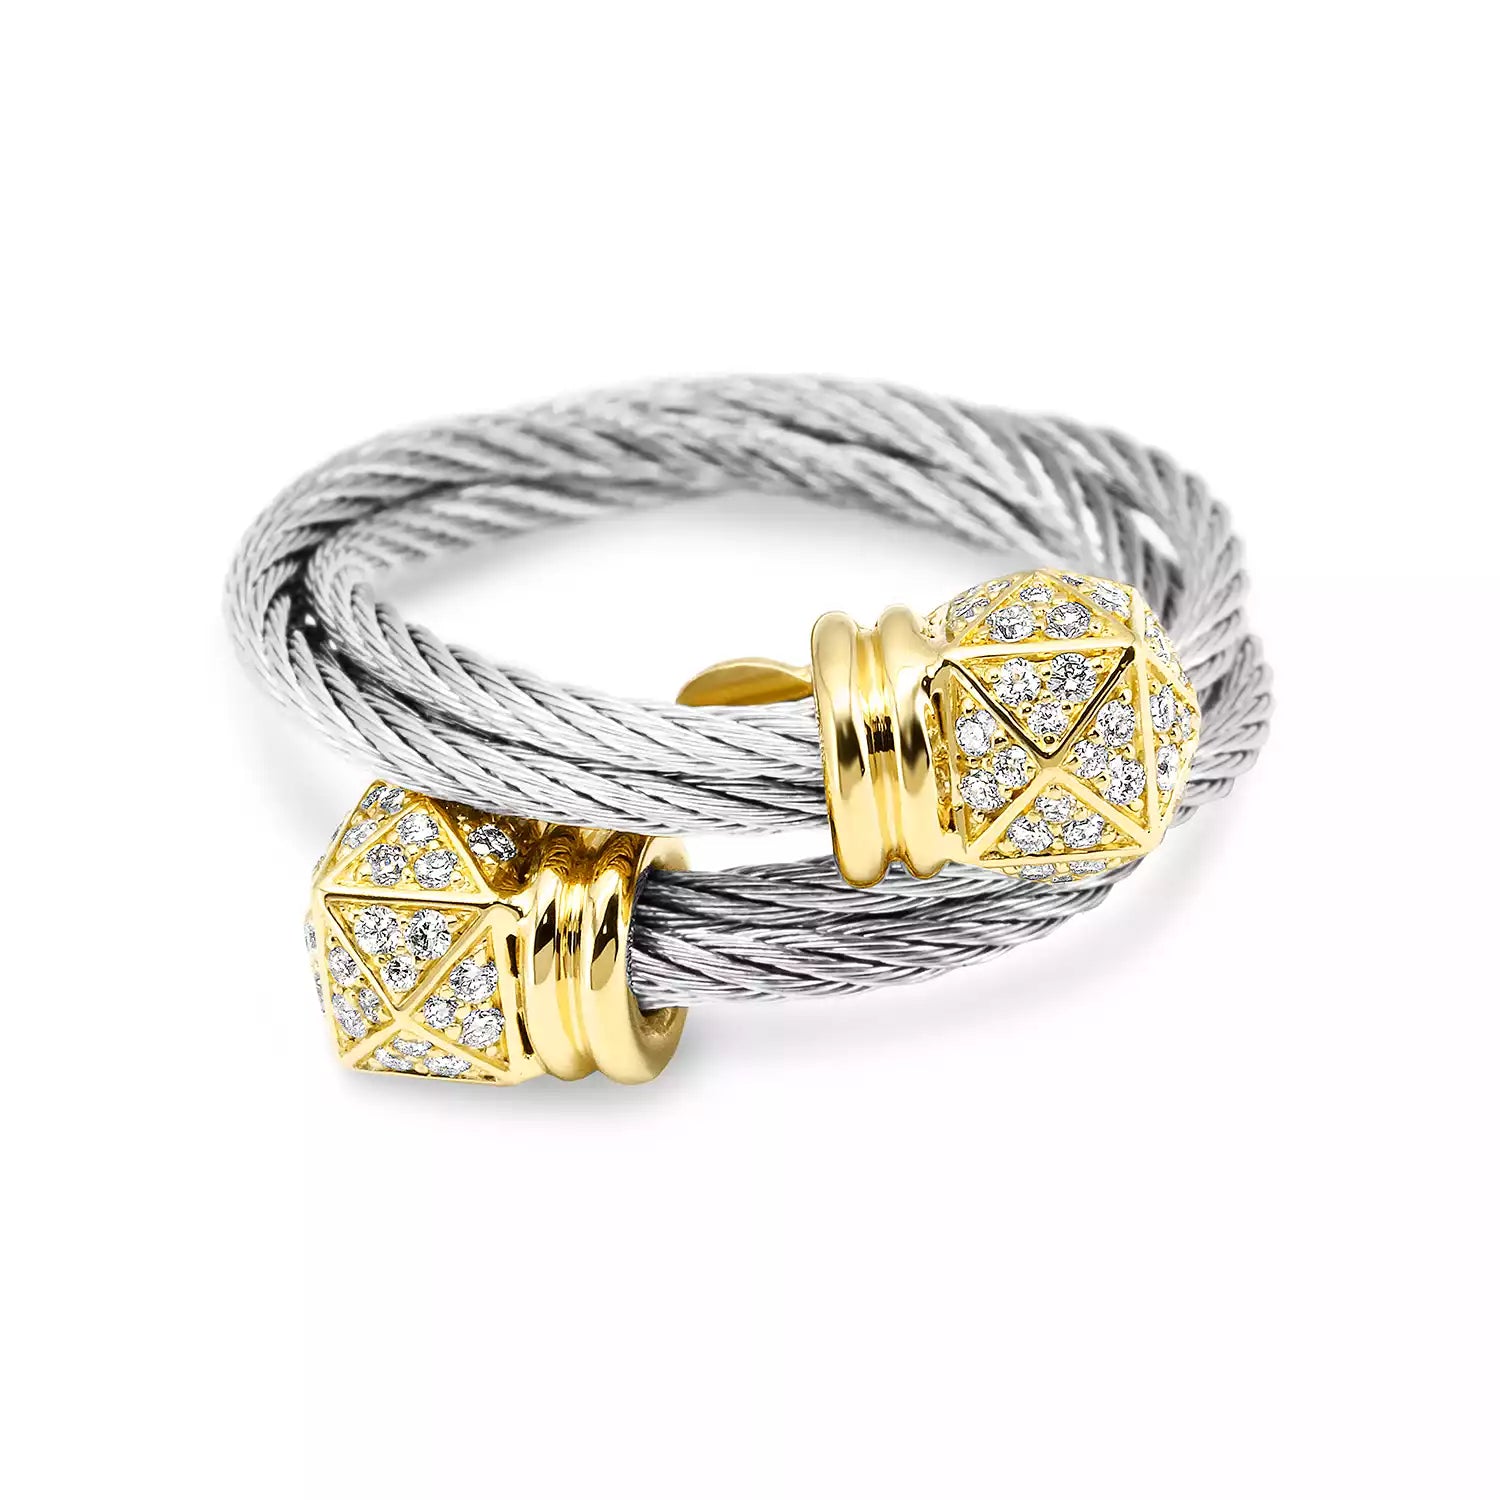 Steel_Gold 18KT with 120 Diamonds 0.57ct